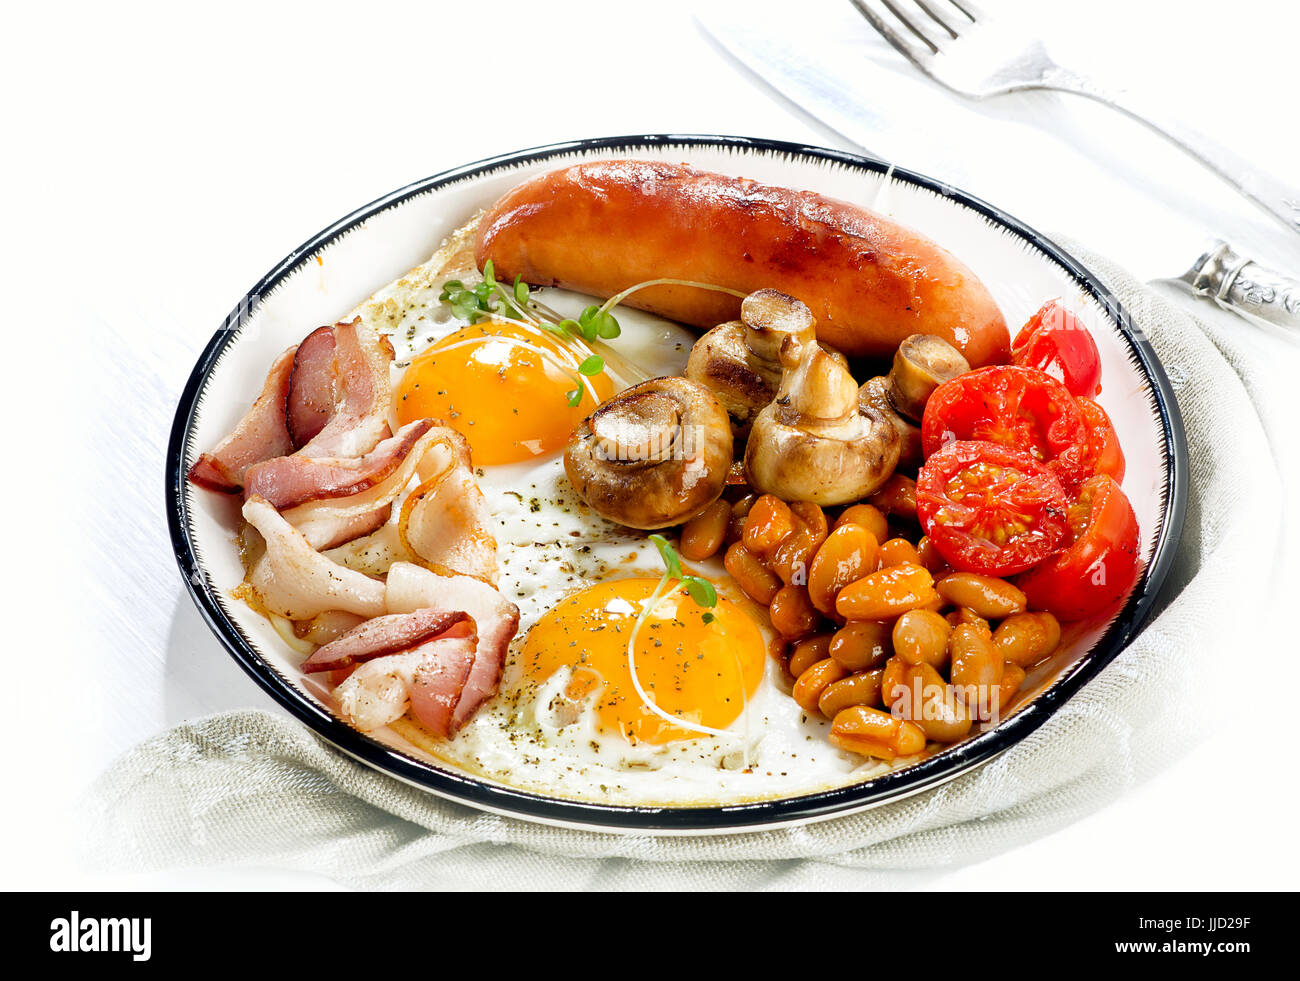 English breakfast with  fried egg, beans, tomatoes, mushrooms, bacon and sausage on a white plate Stock Photo